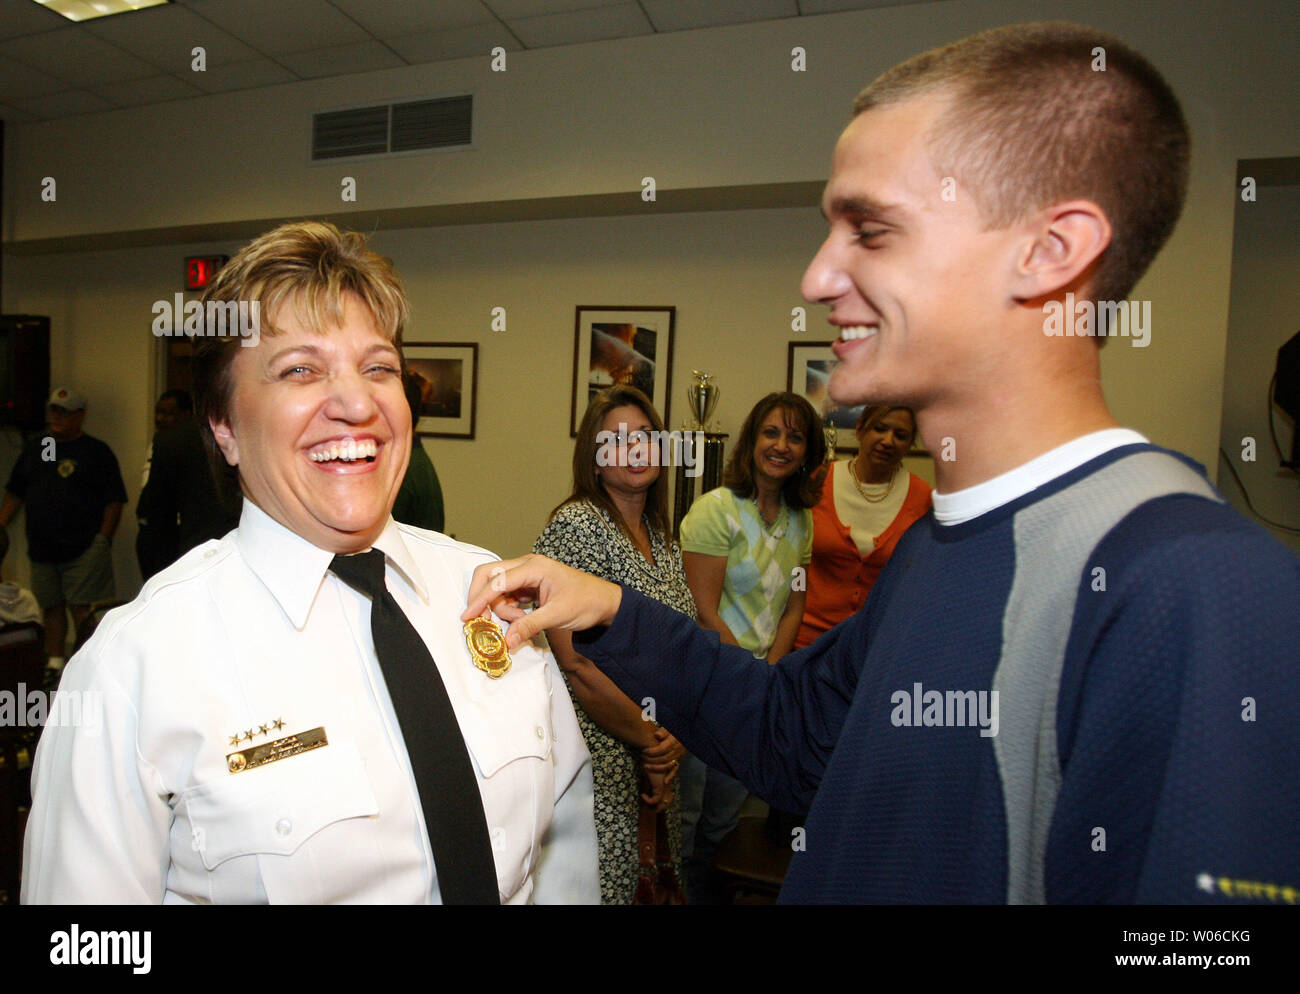 Newly appointed St. Louis Fire Department Battalion Chief Gail Simmons has her badge pinned on by her son David following ceremonies in St. Louis on October 2, 2007. Simmons is the first female in the 150 history of the department to make it to the rank of battalion chief.  (UPI Photo/Bill Greenblatt) Stock Photo